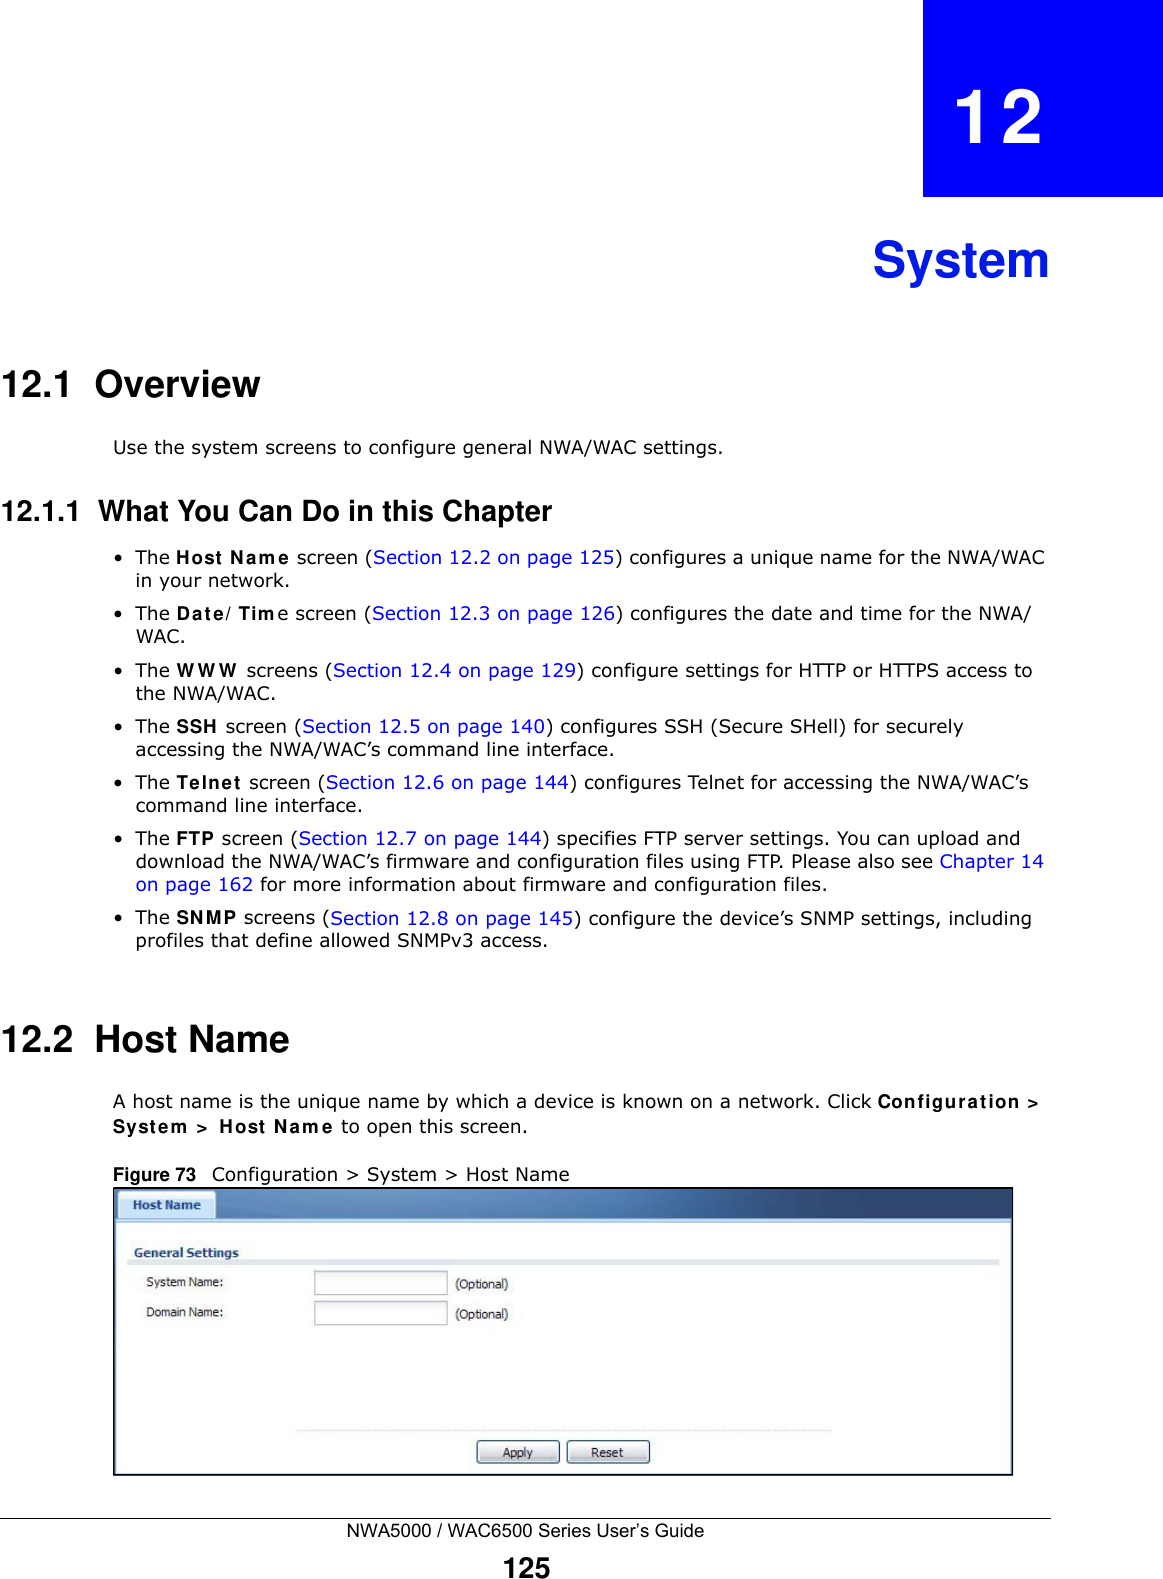 NWA5000 / WAC6500 Series User’s Guide125CHAPTER   12System12.1  OverviewUse the system screens to configure general NWA/WAC settings. 12.1.1  What You Can Do in this Chapter•The H ost  Nam e  screen (Section 12.2 on page 125) configures a unique name for the NWA/WAC in your network.•The D at e/ Tim e screen (Section 12.3 on page 126) configures the date and time for the NWA/WAC.•The WWW screens (Section 12.4 on page 129) configure settings for HTTP or HTTPS access to the NWA/WAC. •The SSH  screen (Section 12.5 on page 140) configures SSH (Secure SHell) for securely accessing the NWA/WAC’s command line interface. •The Telne t screen (Section 12.6 on page 144) configures Telnet for accessing the NWA/WAC’s command line interface. •The FTP screen (Section 12.7 on page 144) specifies FTP server settings. You can upload and download the NWA/WAC’s firmware and configuration files using FTP. Please also see Chapter 14 on page 162 for more information about firmware and configuration files.•The SN M P screens (Section 12.8 on page 145) configure the device’s SNMP settings, including profiles that define allowed SNMPv3 access.12.2  Host NameA host name is the unique name by which a device is known on a network. Click Configur at ion &gt;  Syst em  &gt;  H ost  Nam e  to open this screen.Figure 73   Configuration &gt; System &gt; Host Name